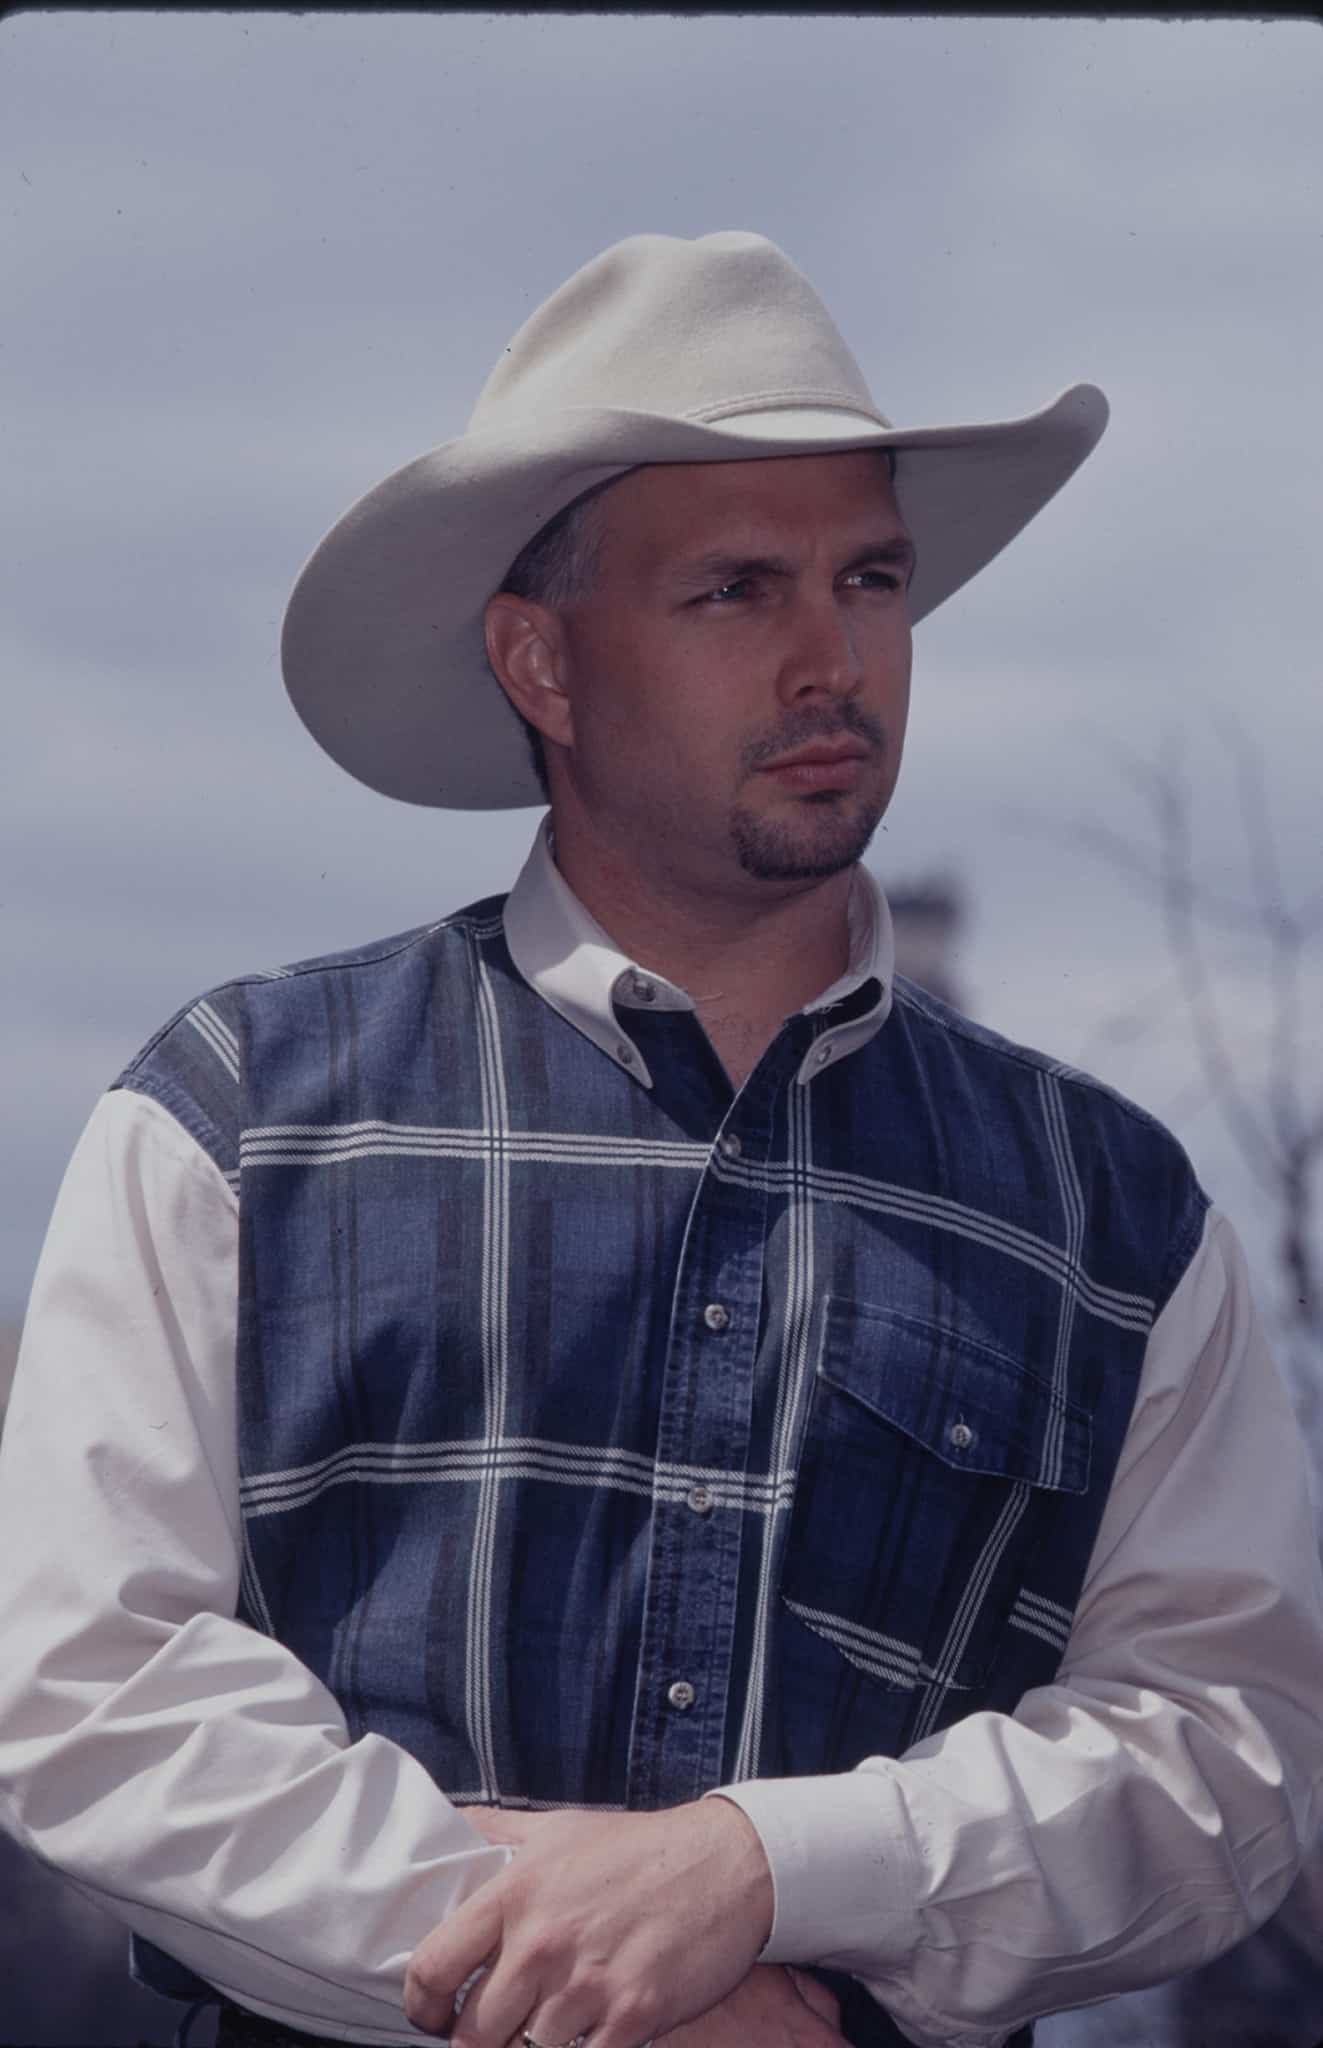 UNITED STATES - MARCH 17: Garth Brooks (Photo by The LIFE Picture Collection/Getty Images)